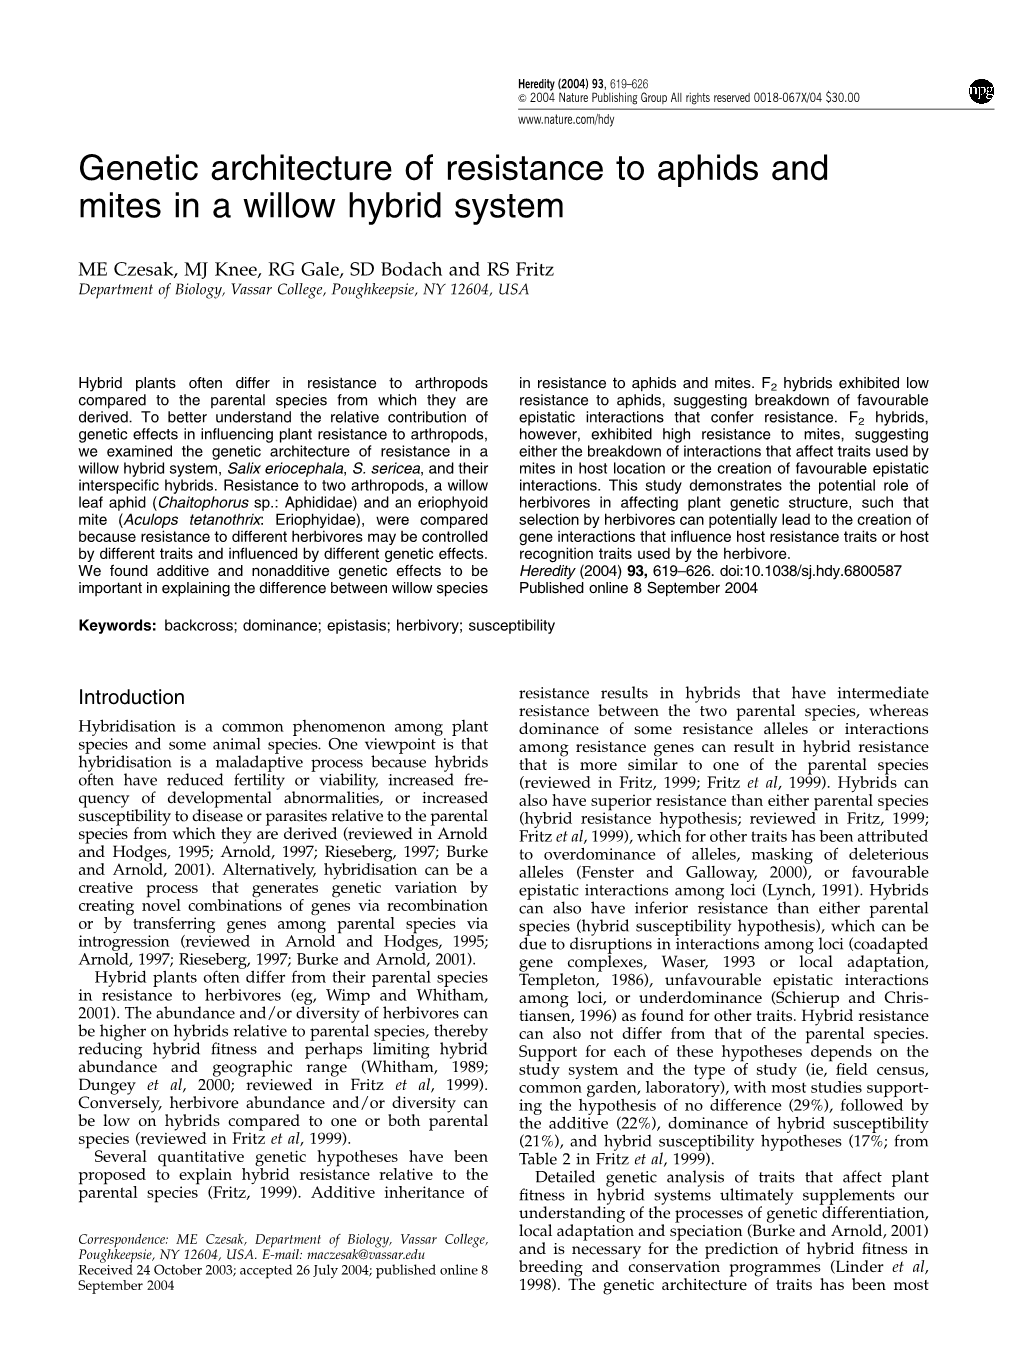 Genetic Architecture of Resistance to Aphids and Mites in a Willow Hybrid System